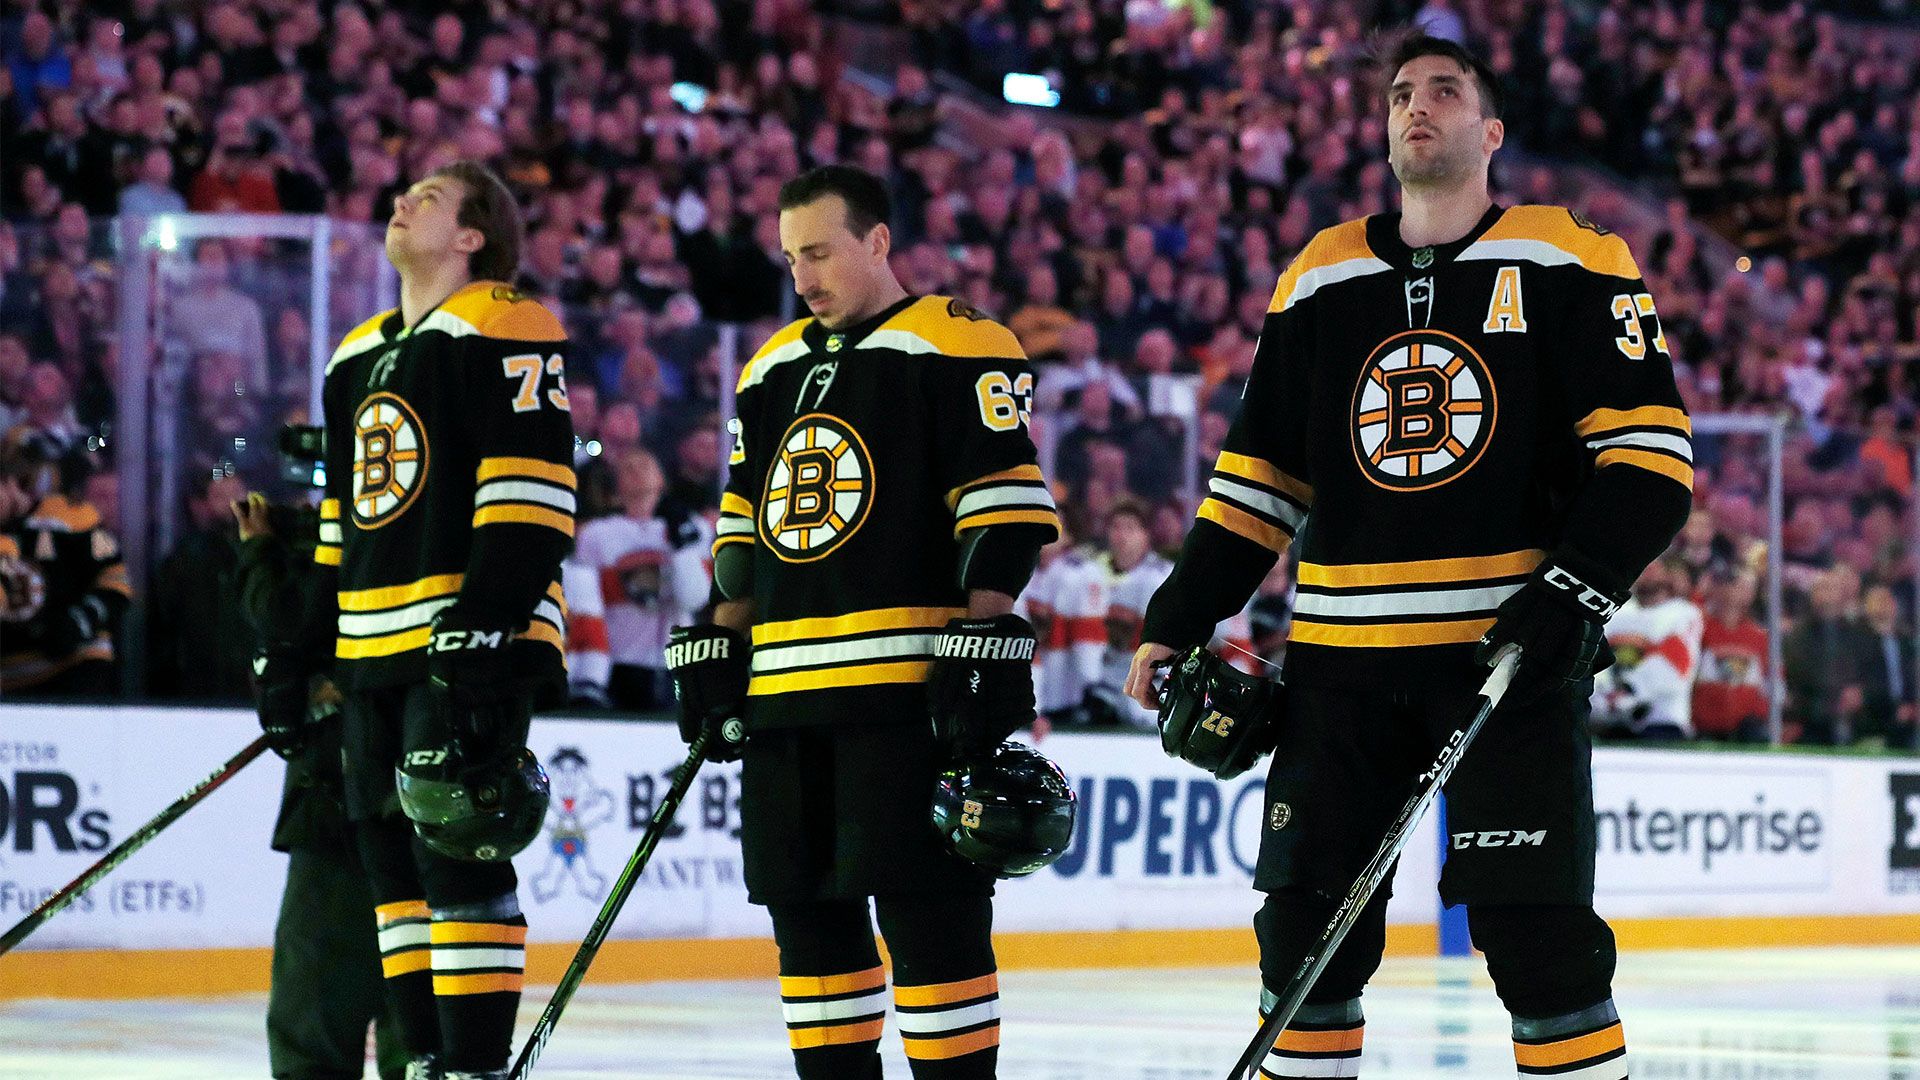 Are The Boston Bruins Exploring Options To Play At Fenway?